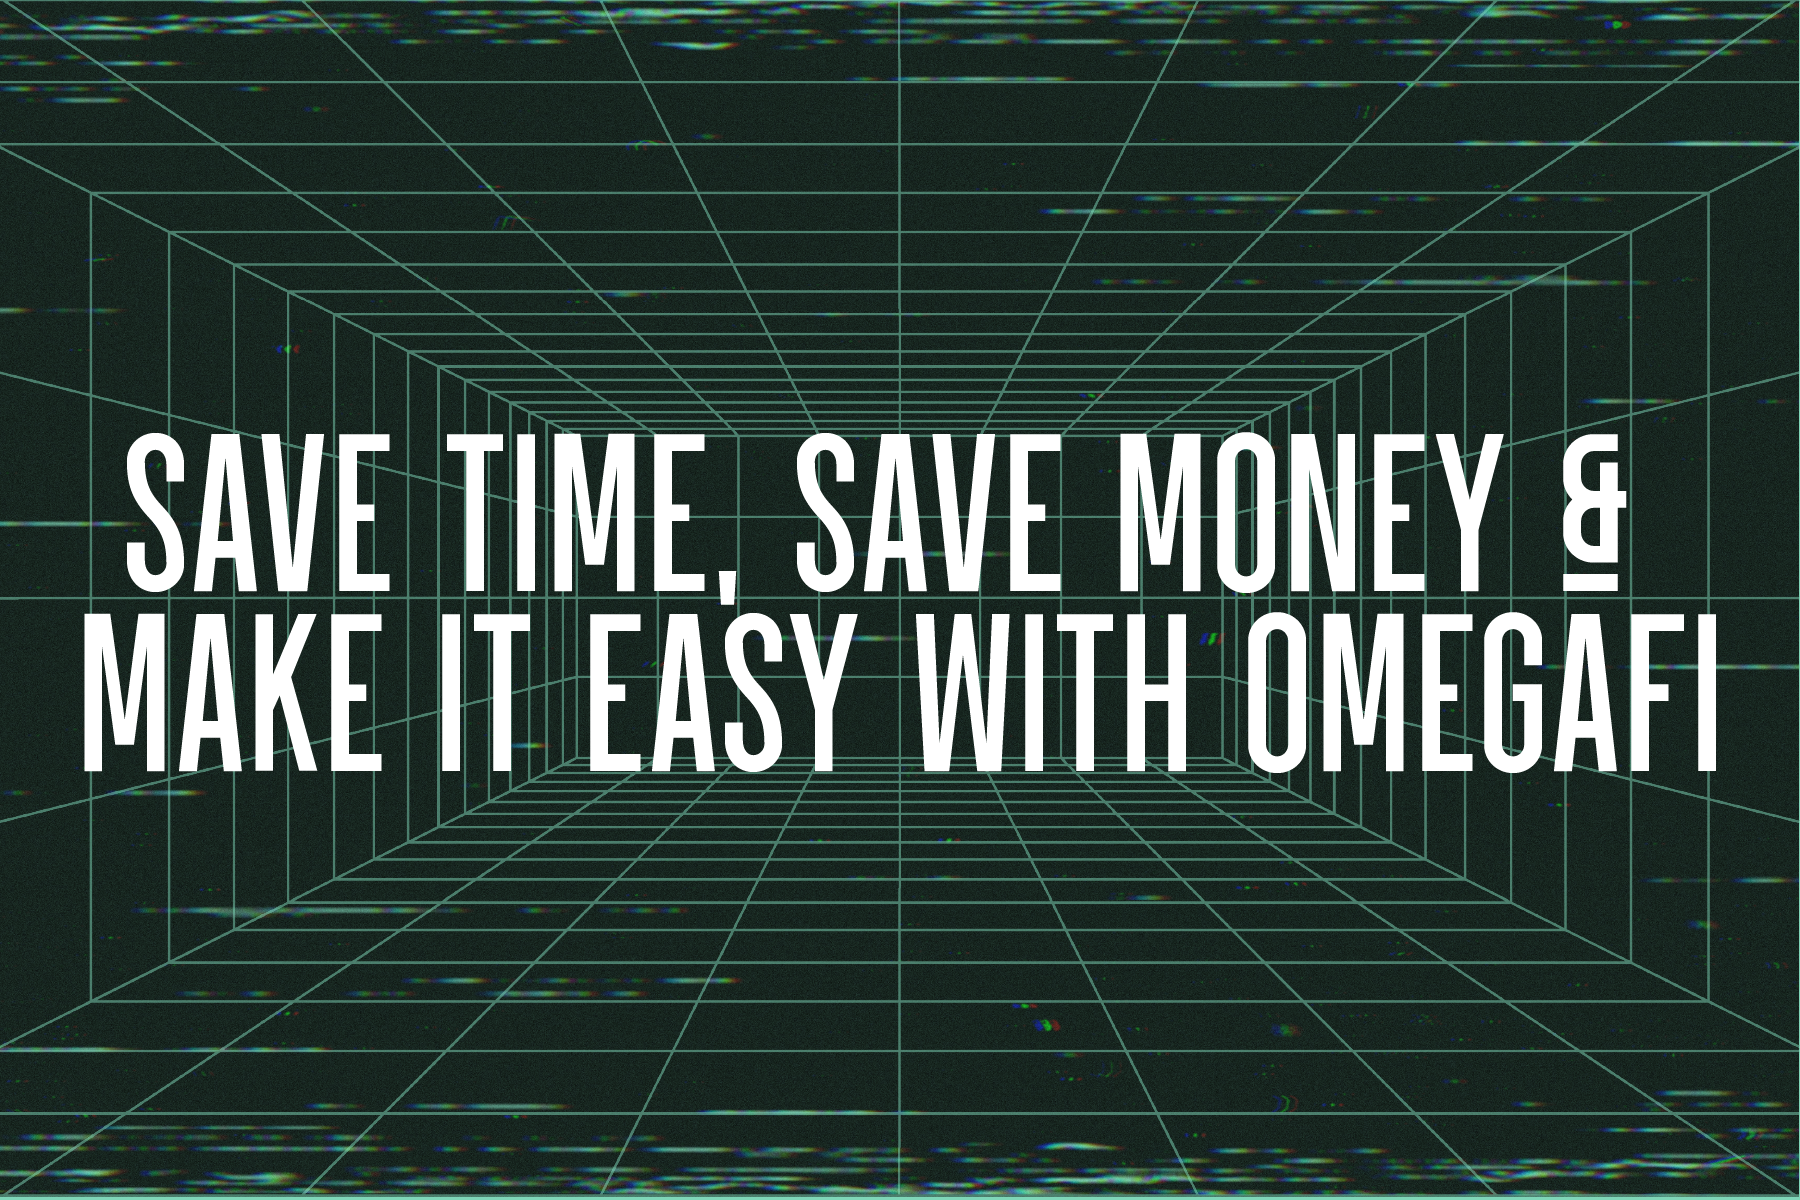 Save time, save money and make it easy with OmegaFi